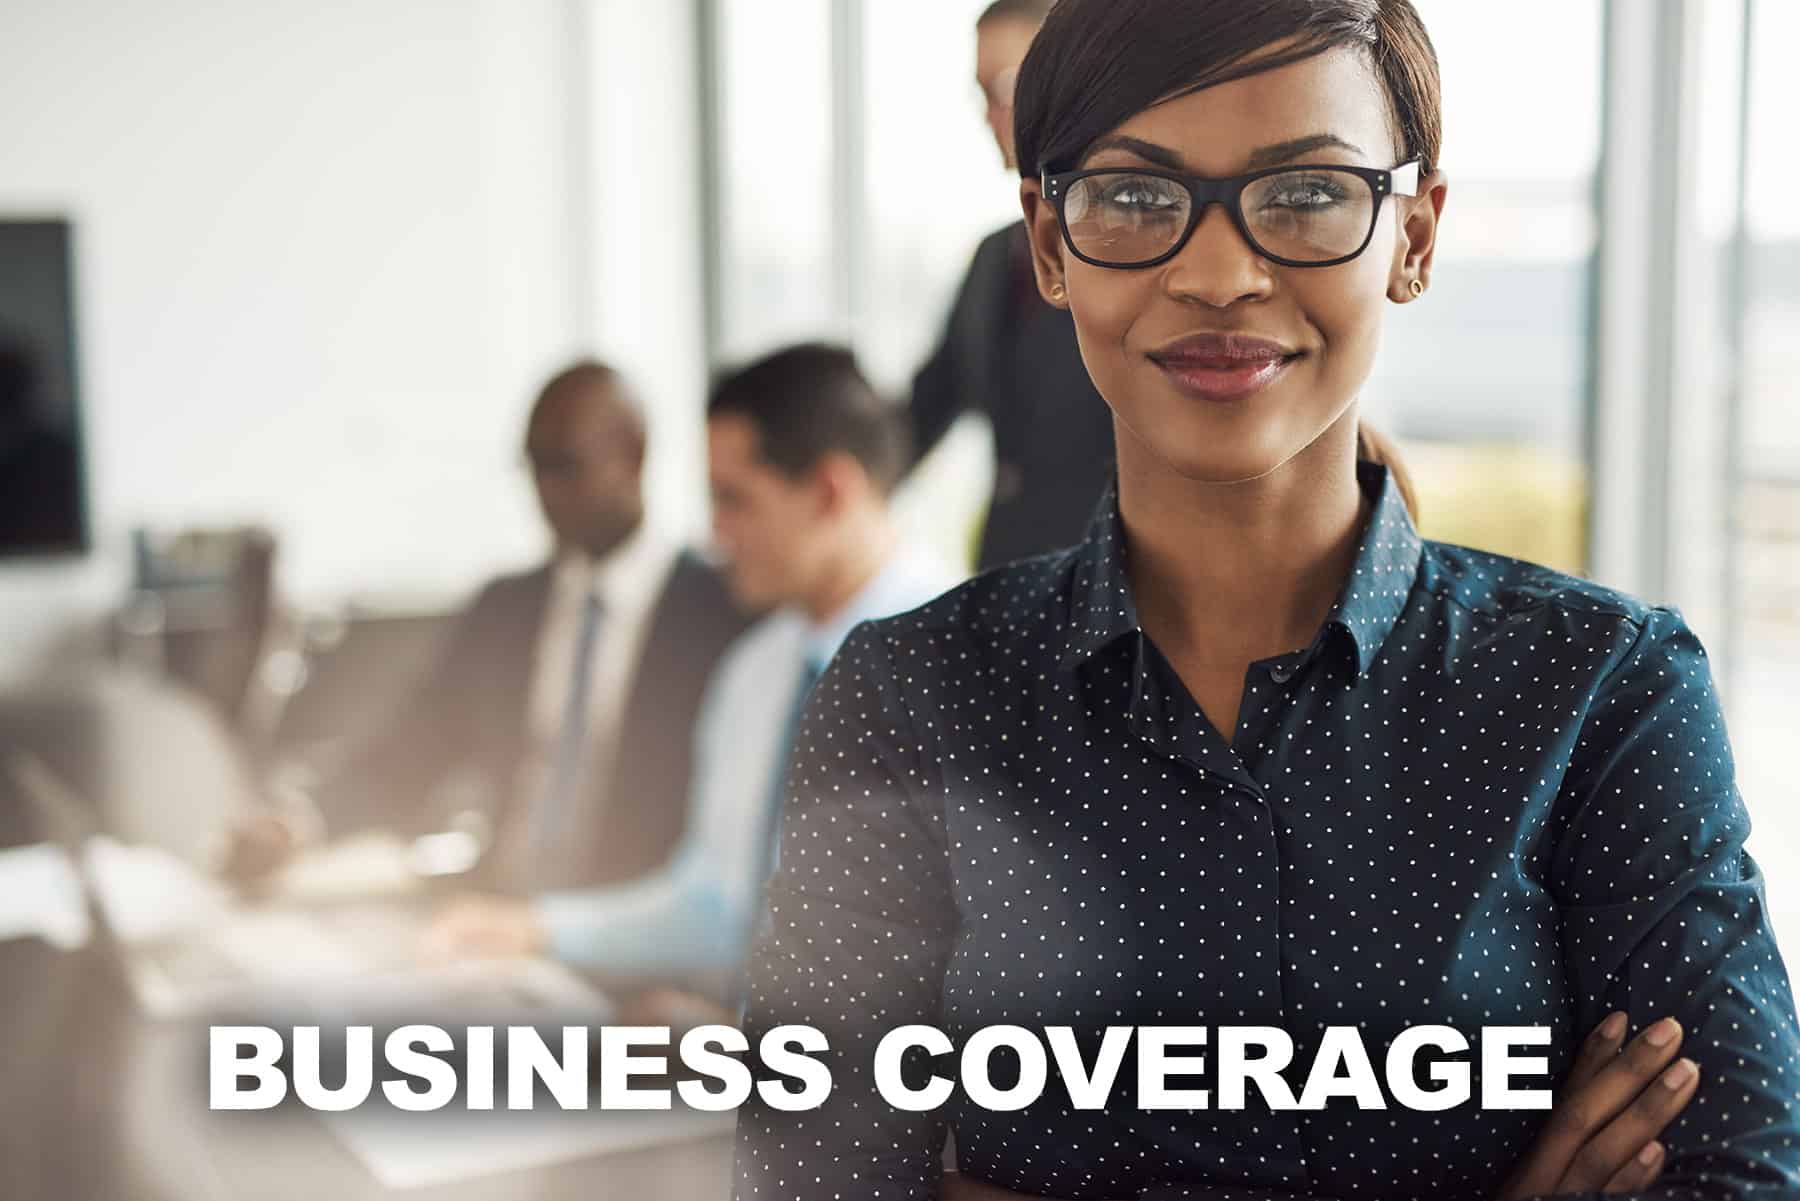 Business Coverage